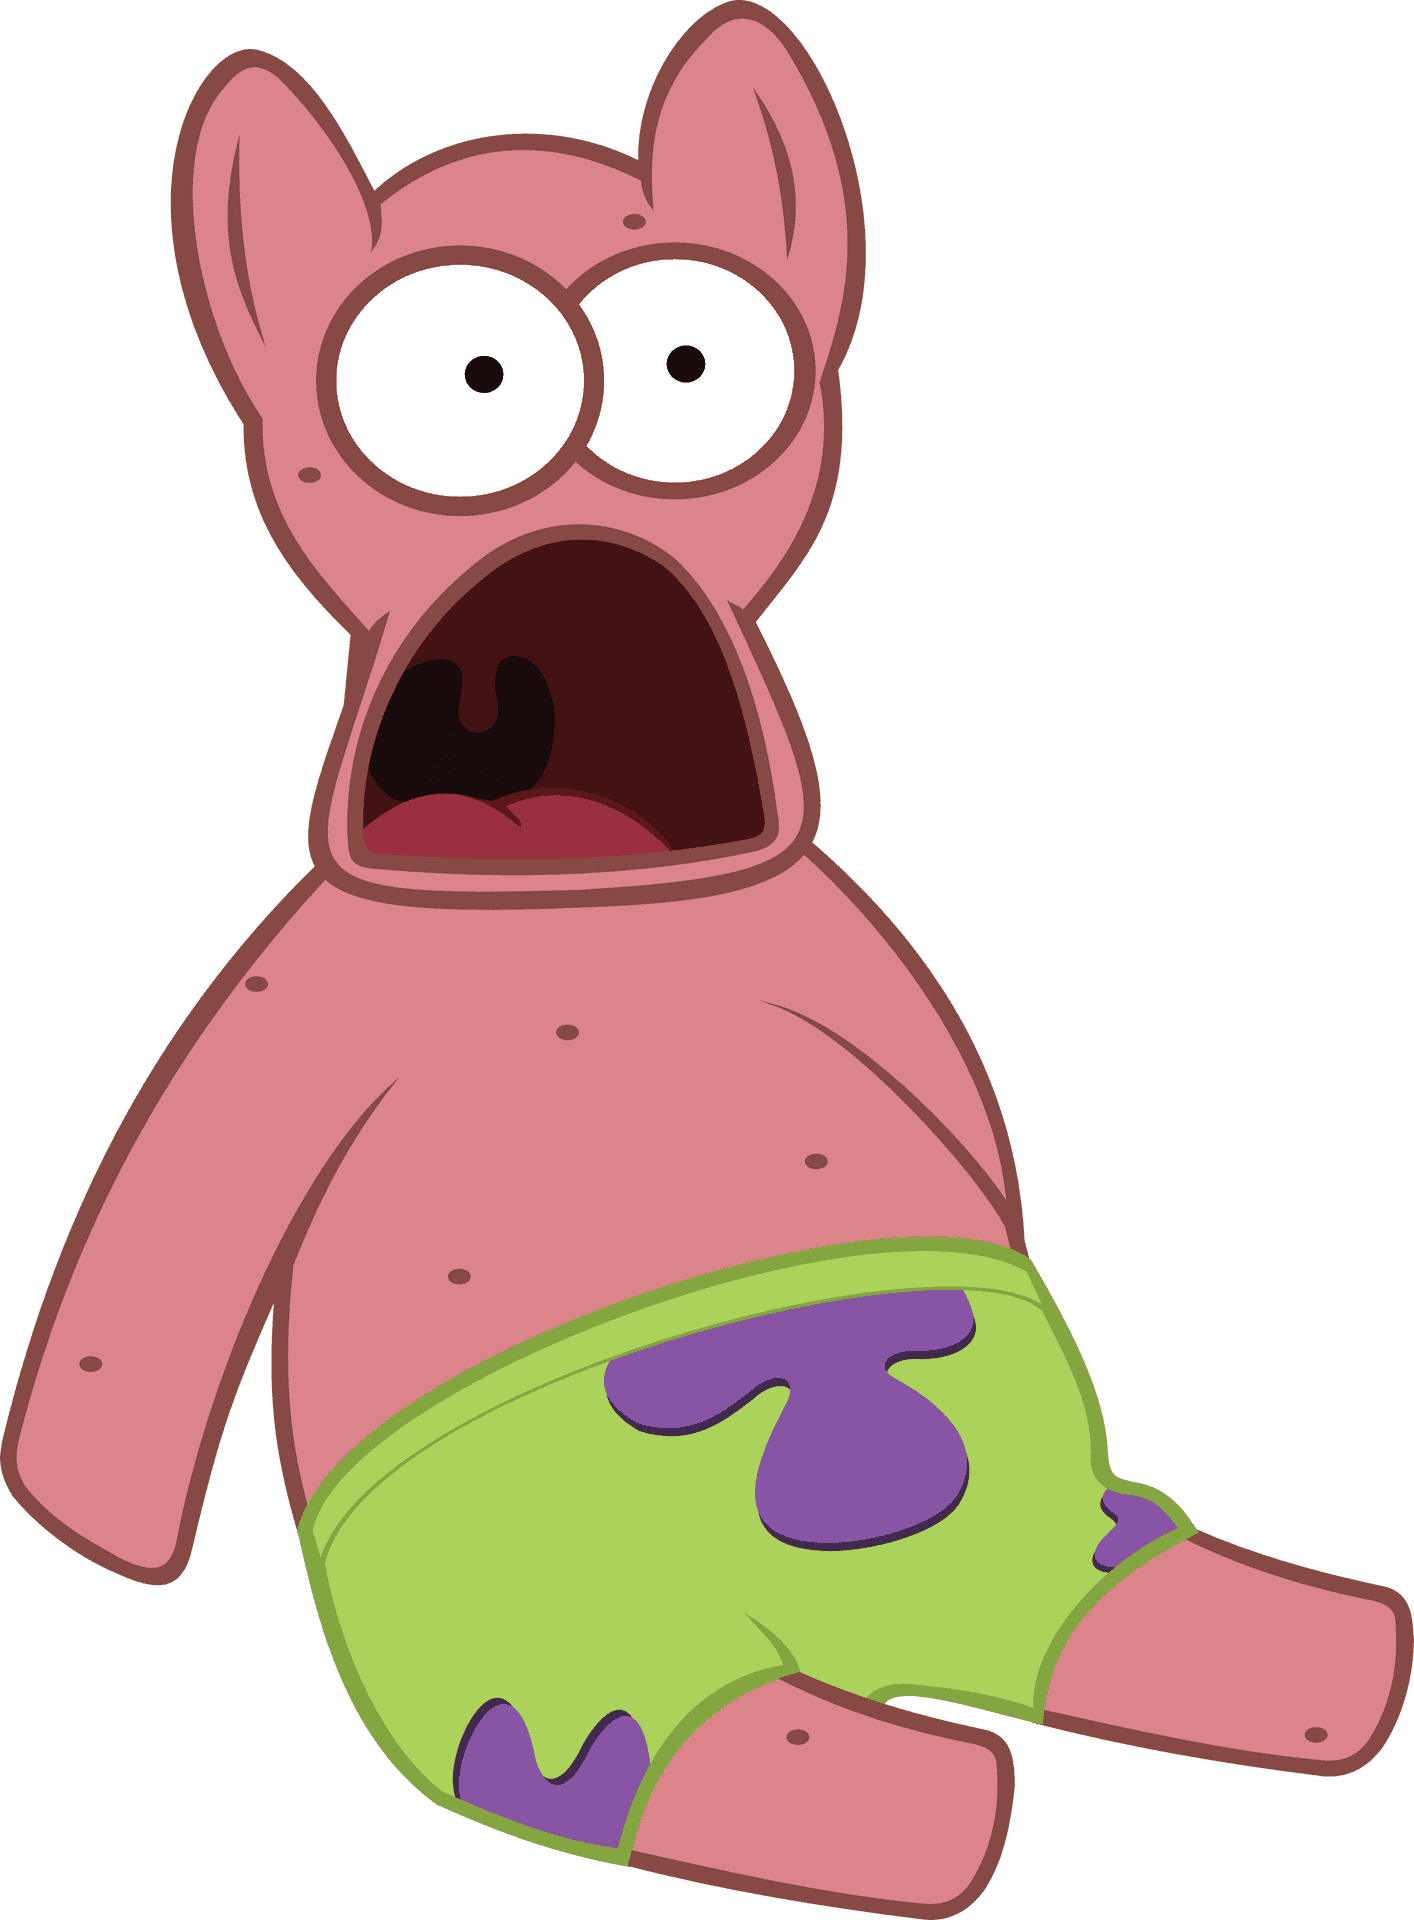 Surprised Pink Cartoon Character PNG image